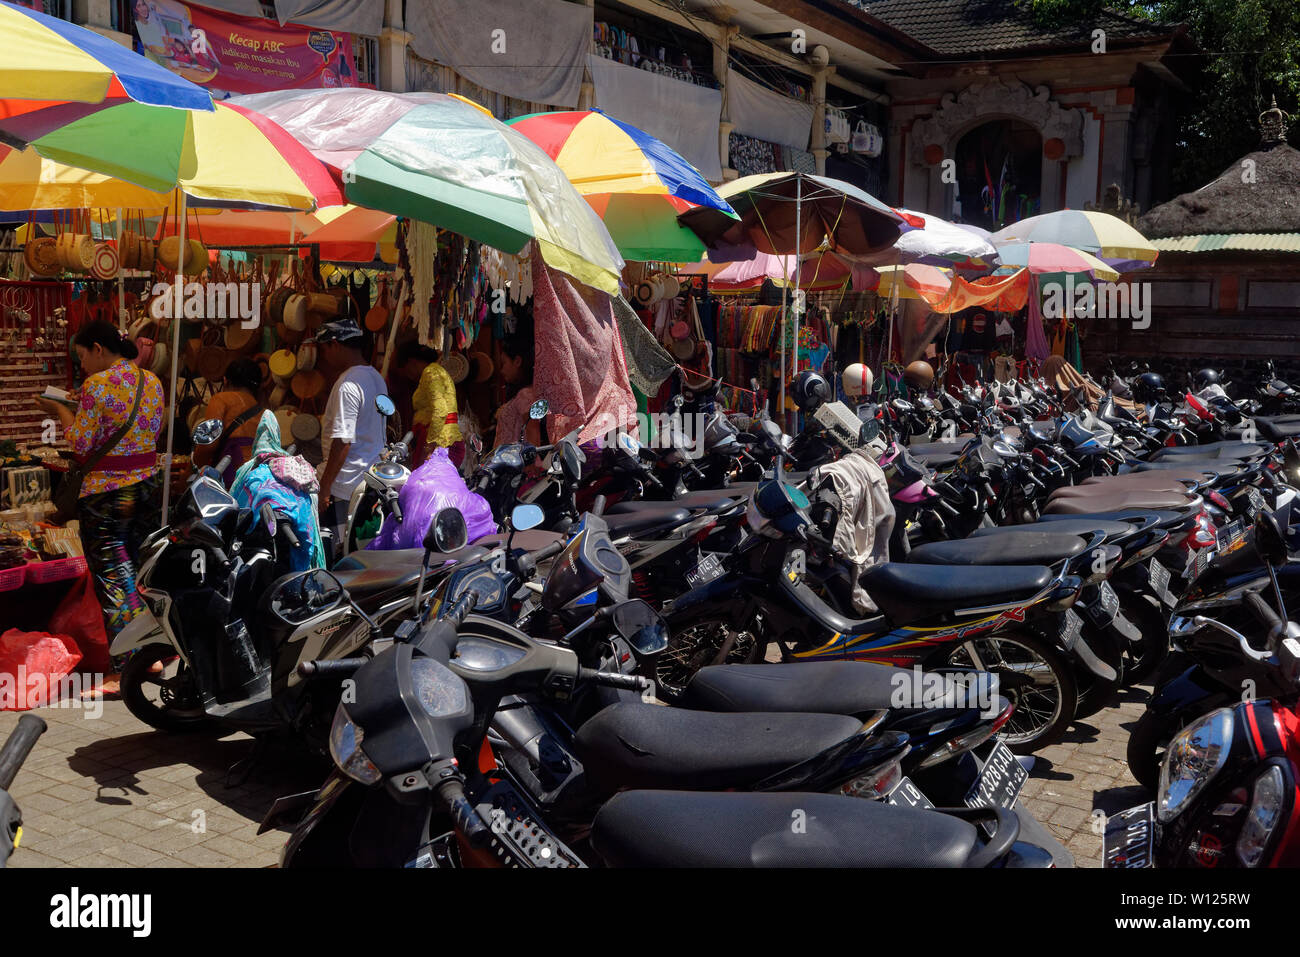 Motorbike parked in the old craft market in Ubud, Bali, Indonesia Stock Photo